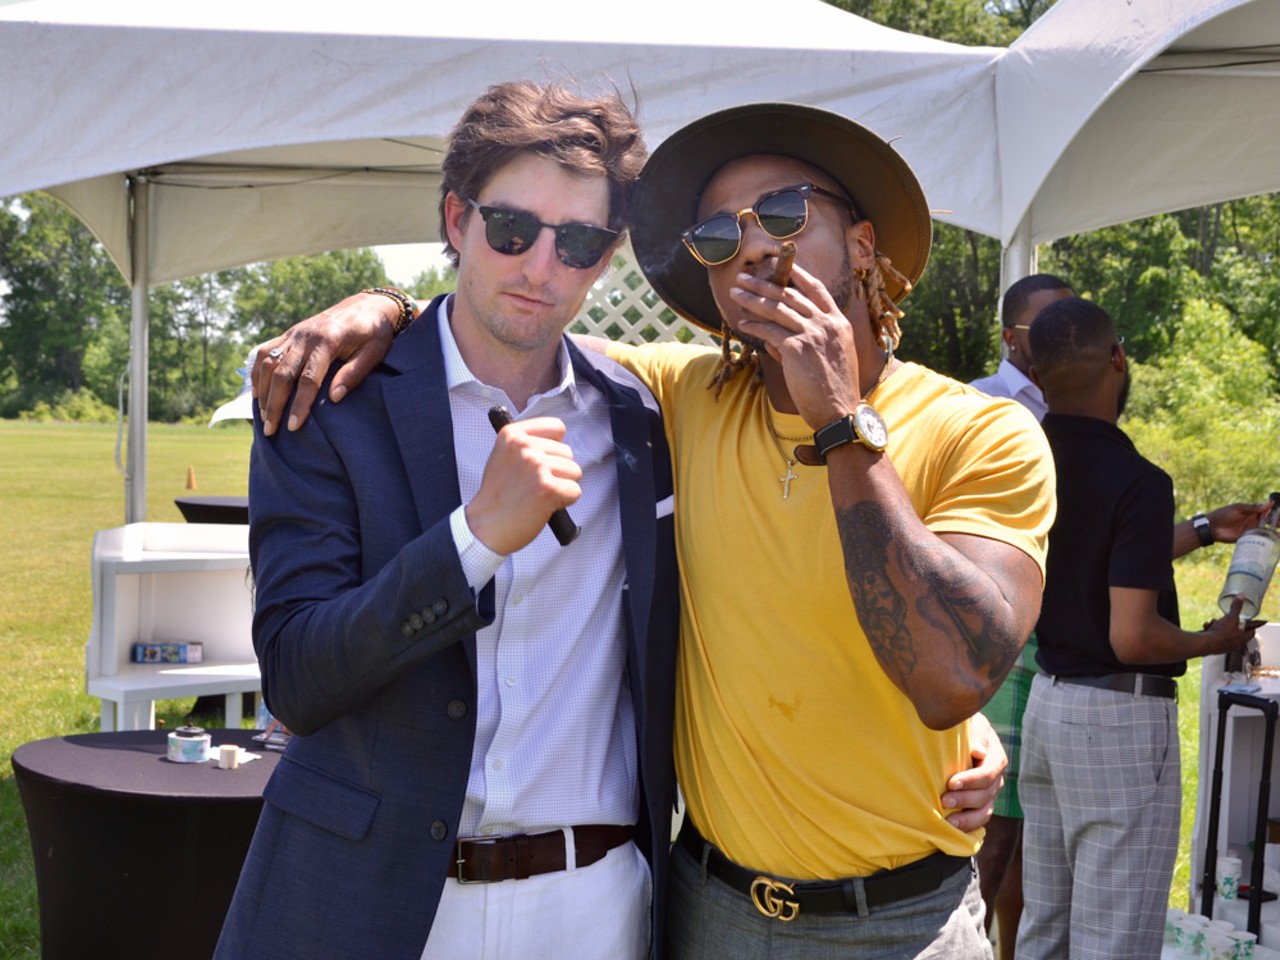 Everyone we saw at the first Polo and Pretty Women Charity Event at the Detroit Polo Club